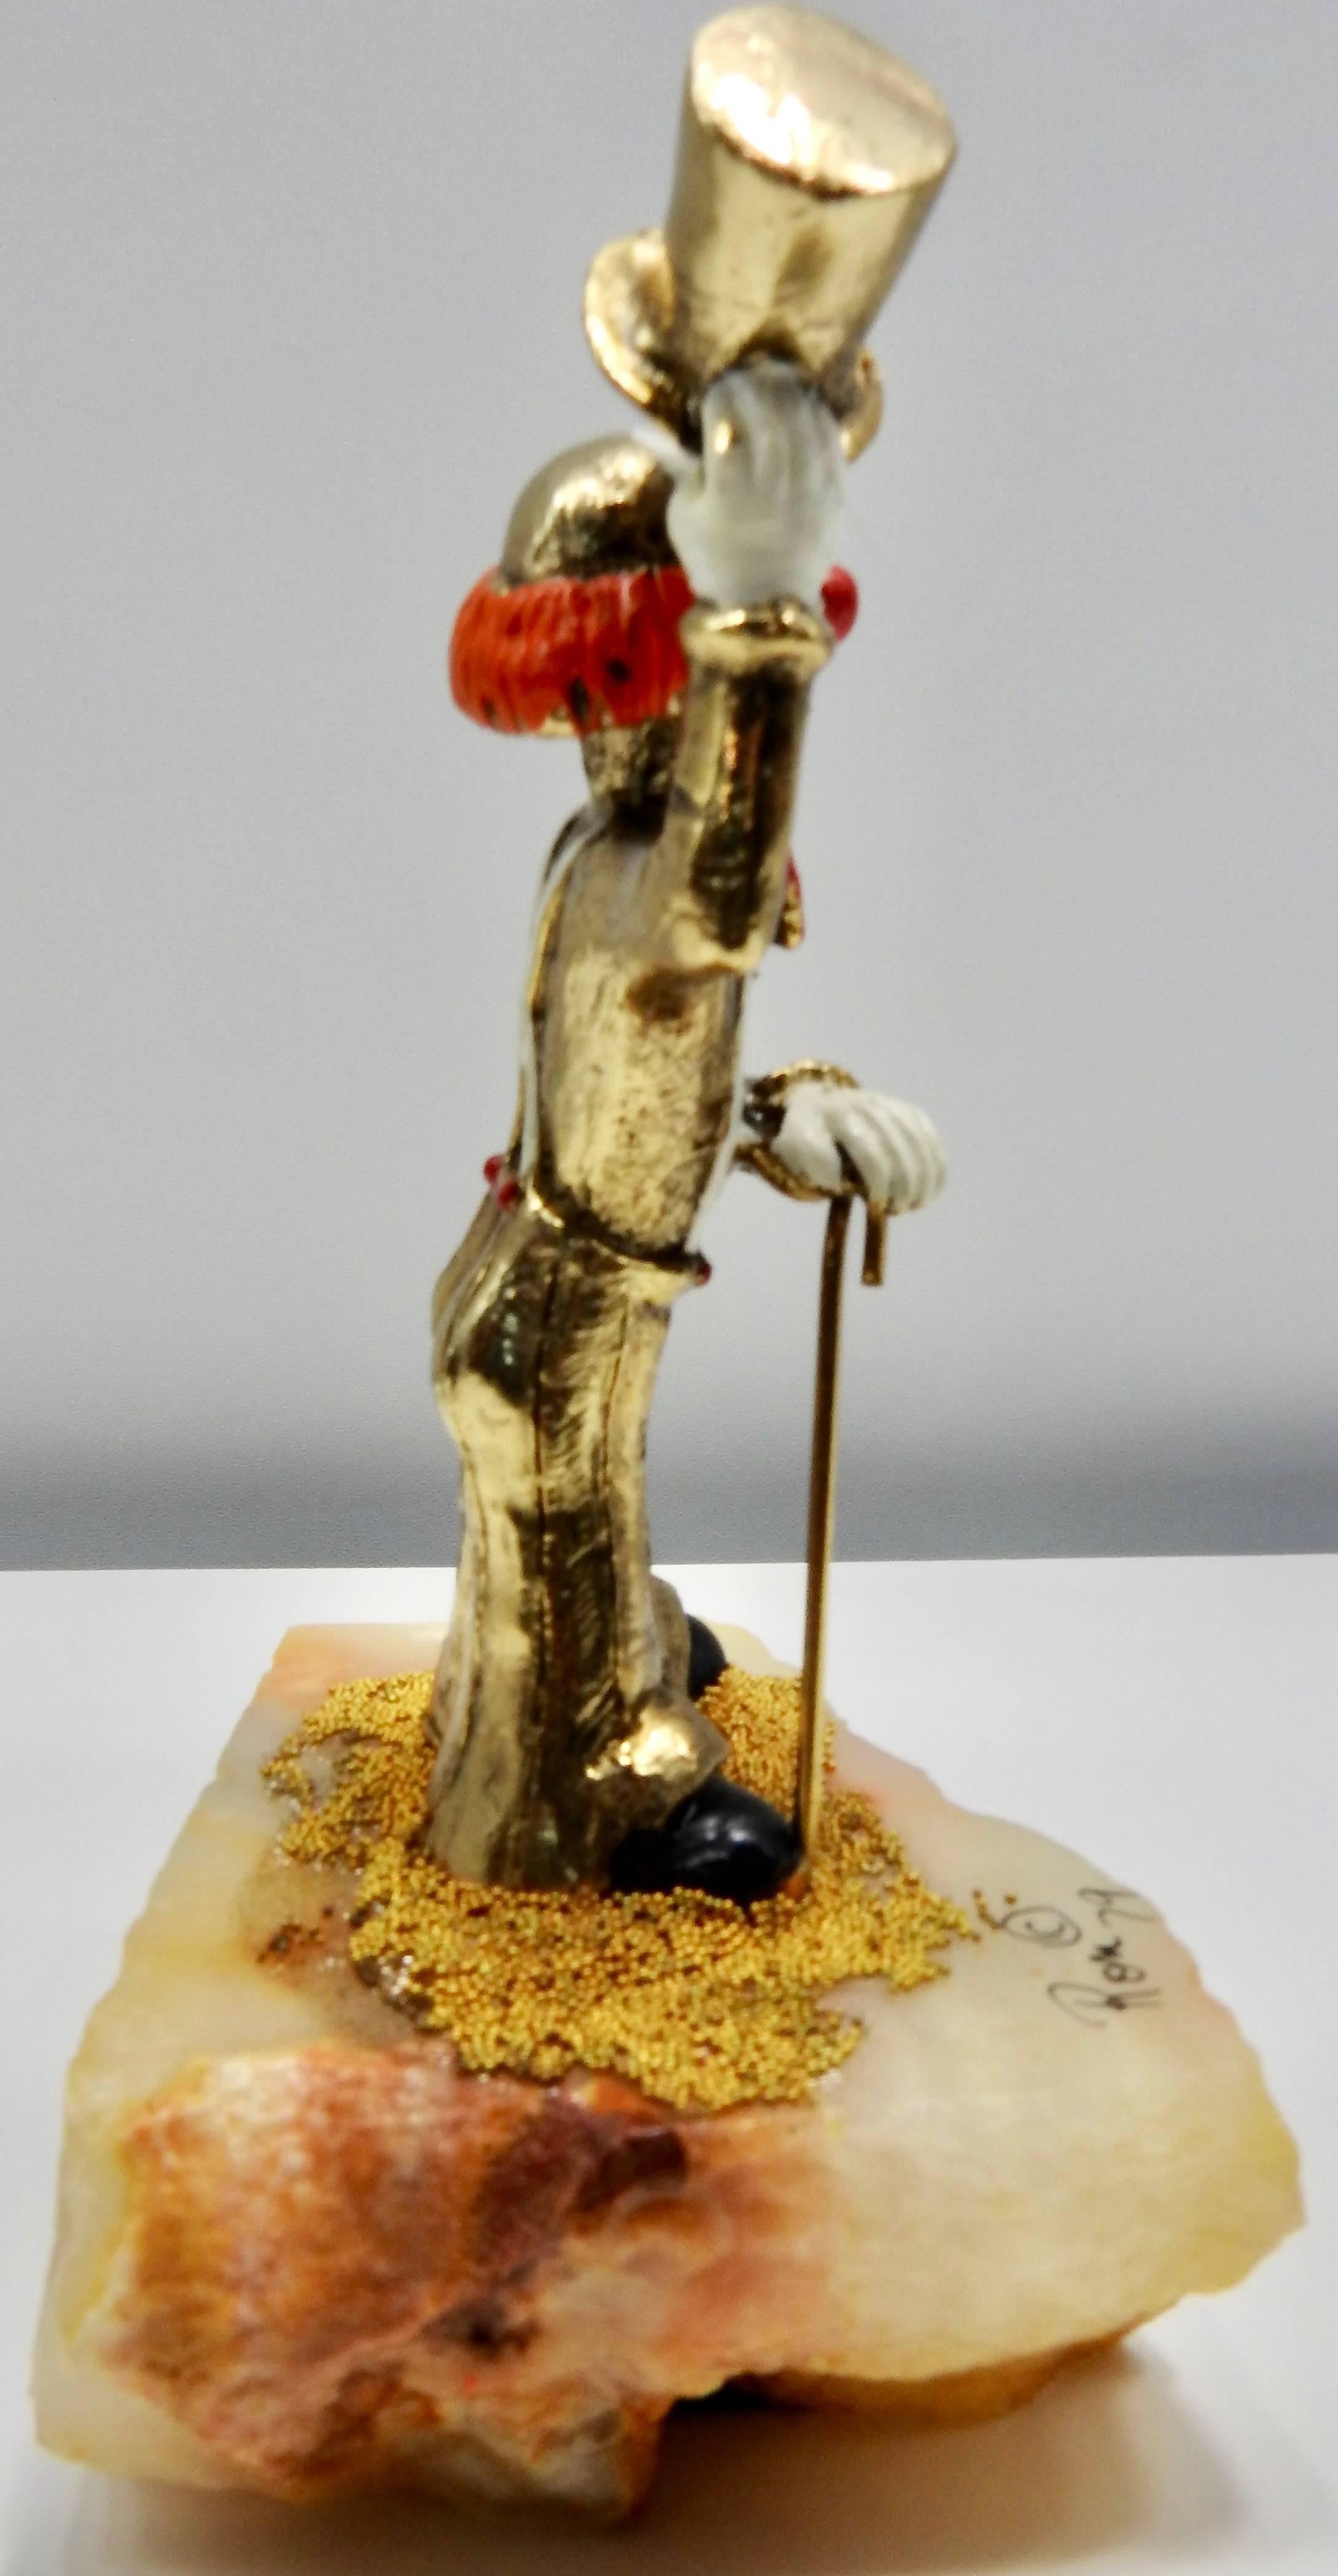 The happy face on this smiling clown by Ron Lee will be a welcome addition to your collections. He is greeting you by raising his top hat and you can just imagine him getting ready to twirl his cane. The details are fabulous and the gold accents